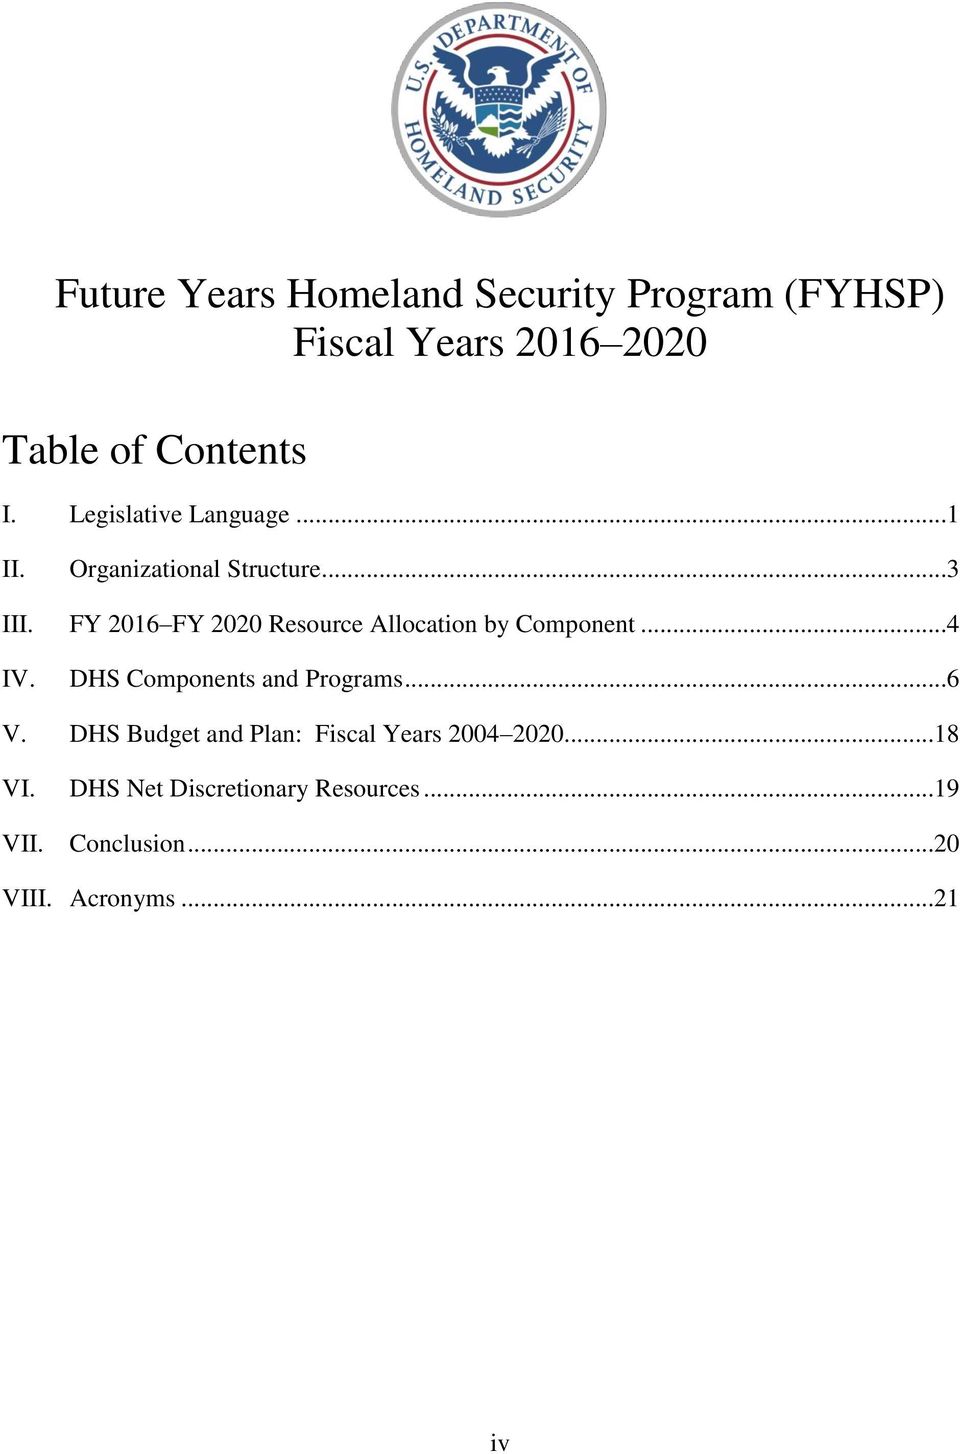 FY 2016 FY 2020 Resource Allocation by Component...4 IV. DHS Components and Programs...6 V.